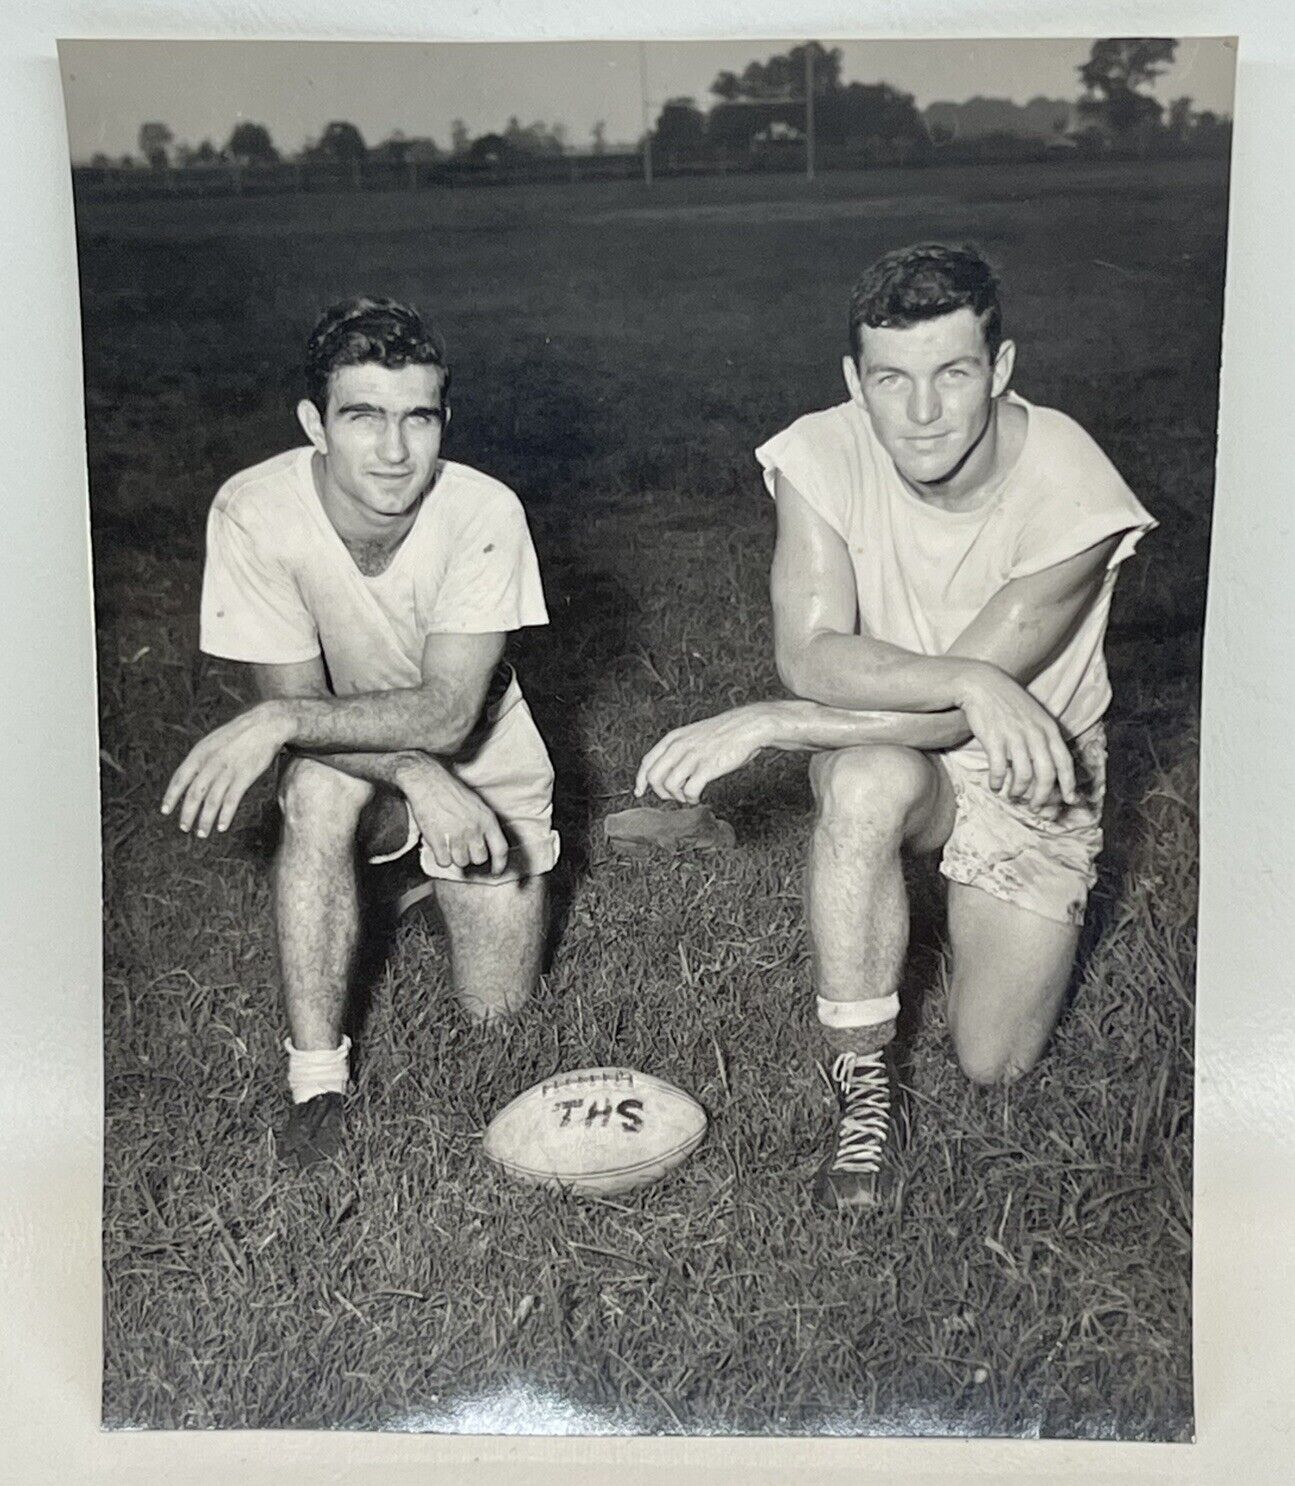 Vtg 1950s Photo Handsome Football Players Posed with Football Truman AR High